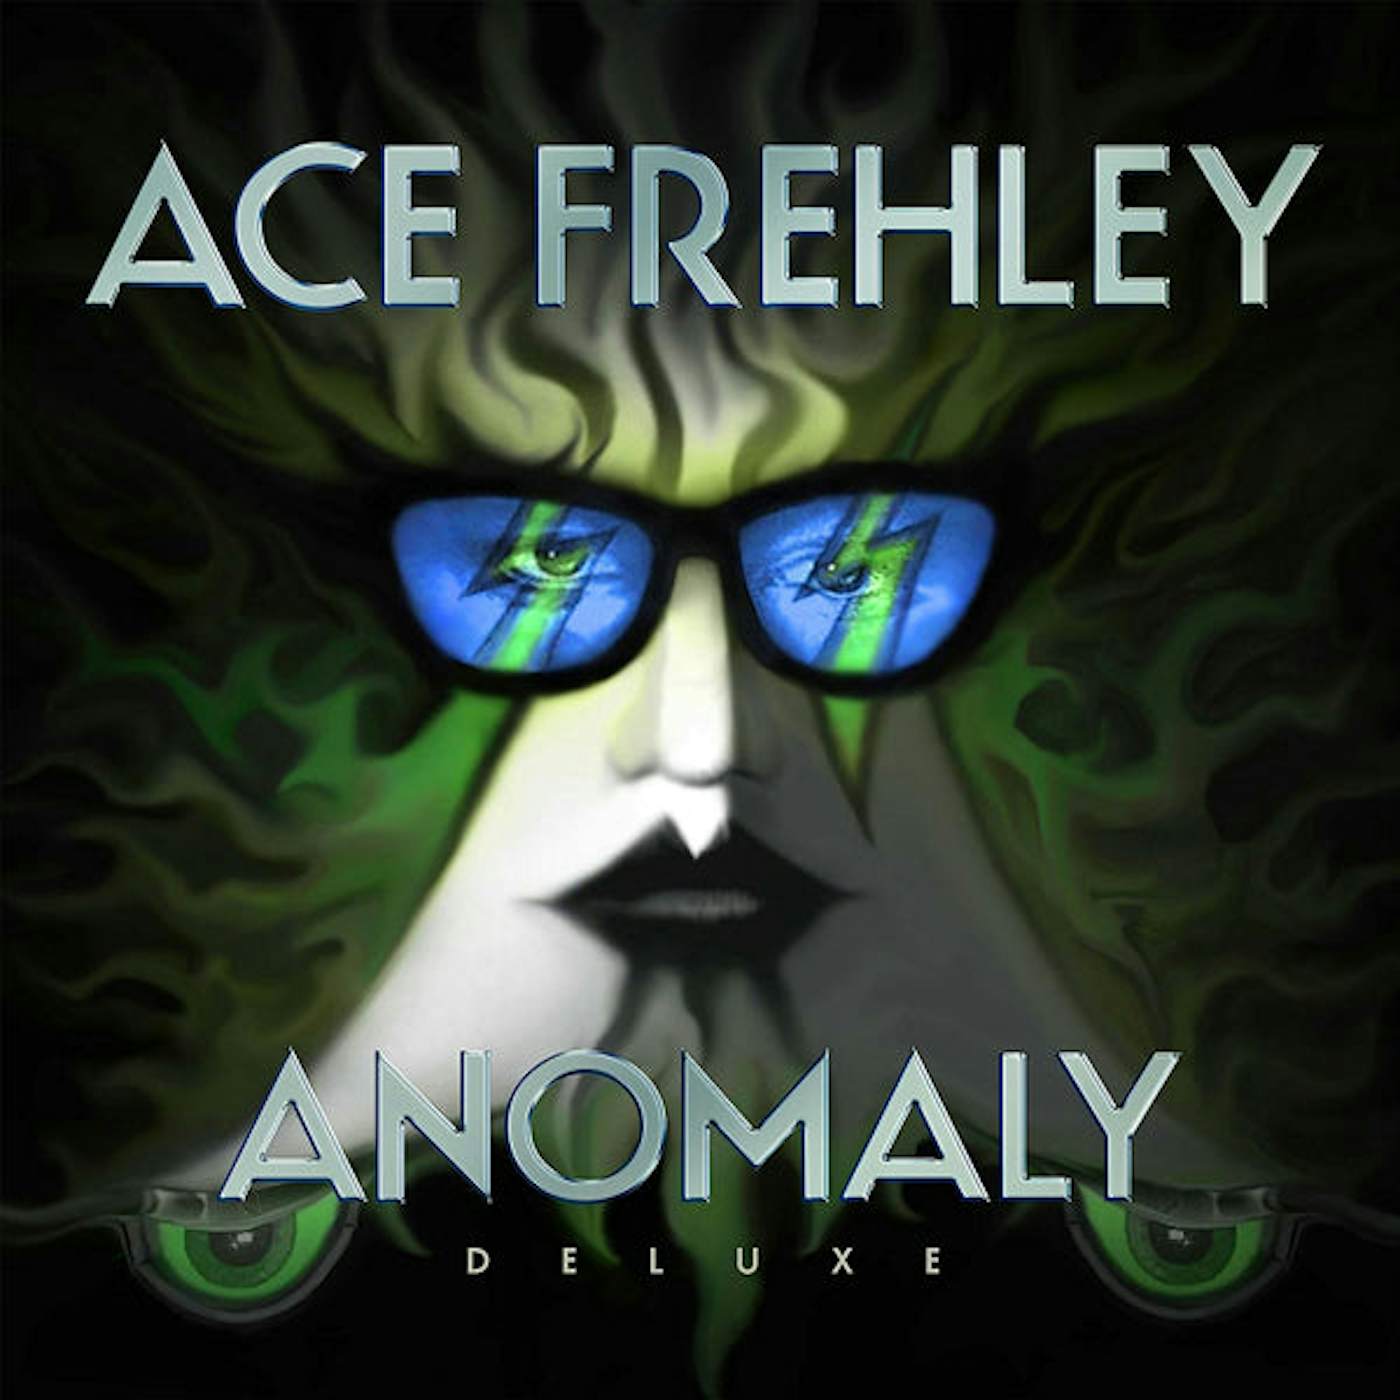 Ace Frehley LP - Anomaly - Deluxe 10Th Anniversary (Silver/Bluejay/Emerald Splatter) (Vinyl)